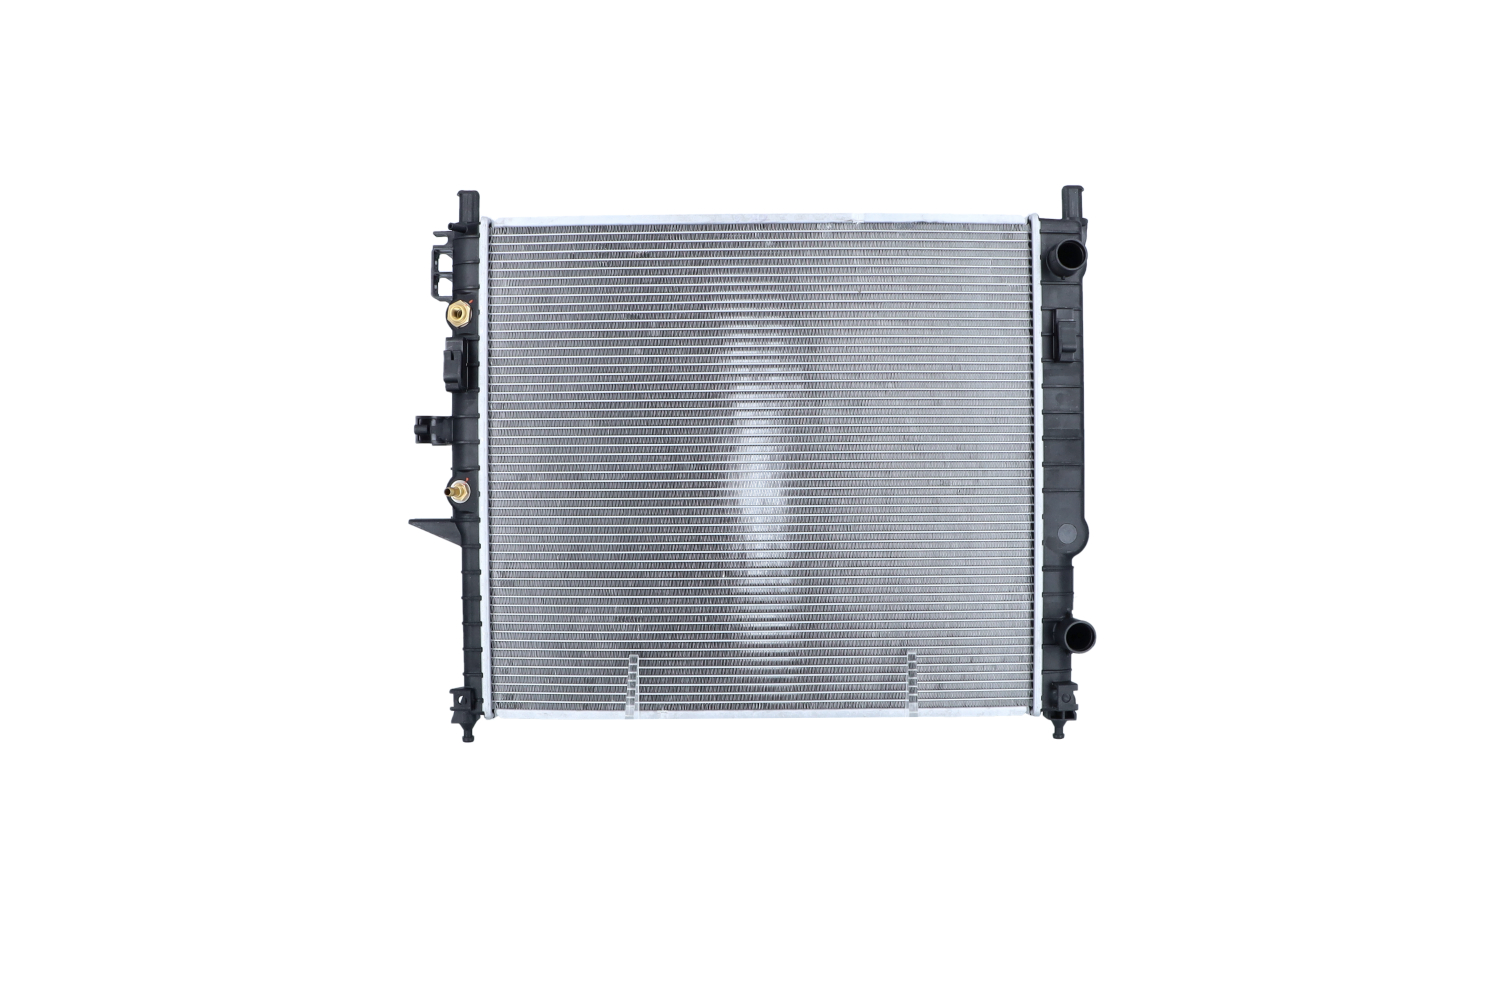 NRF 55335 Engine radiator Aluminium, 610 x 545 x 42 mm, with mounting parts, Brazed cooling fins